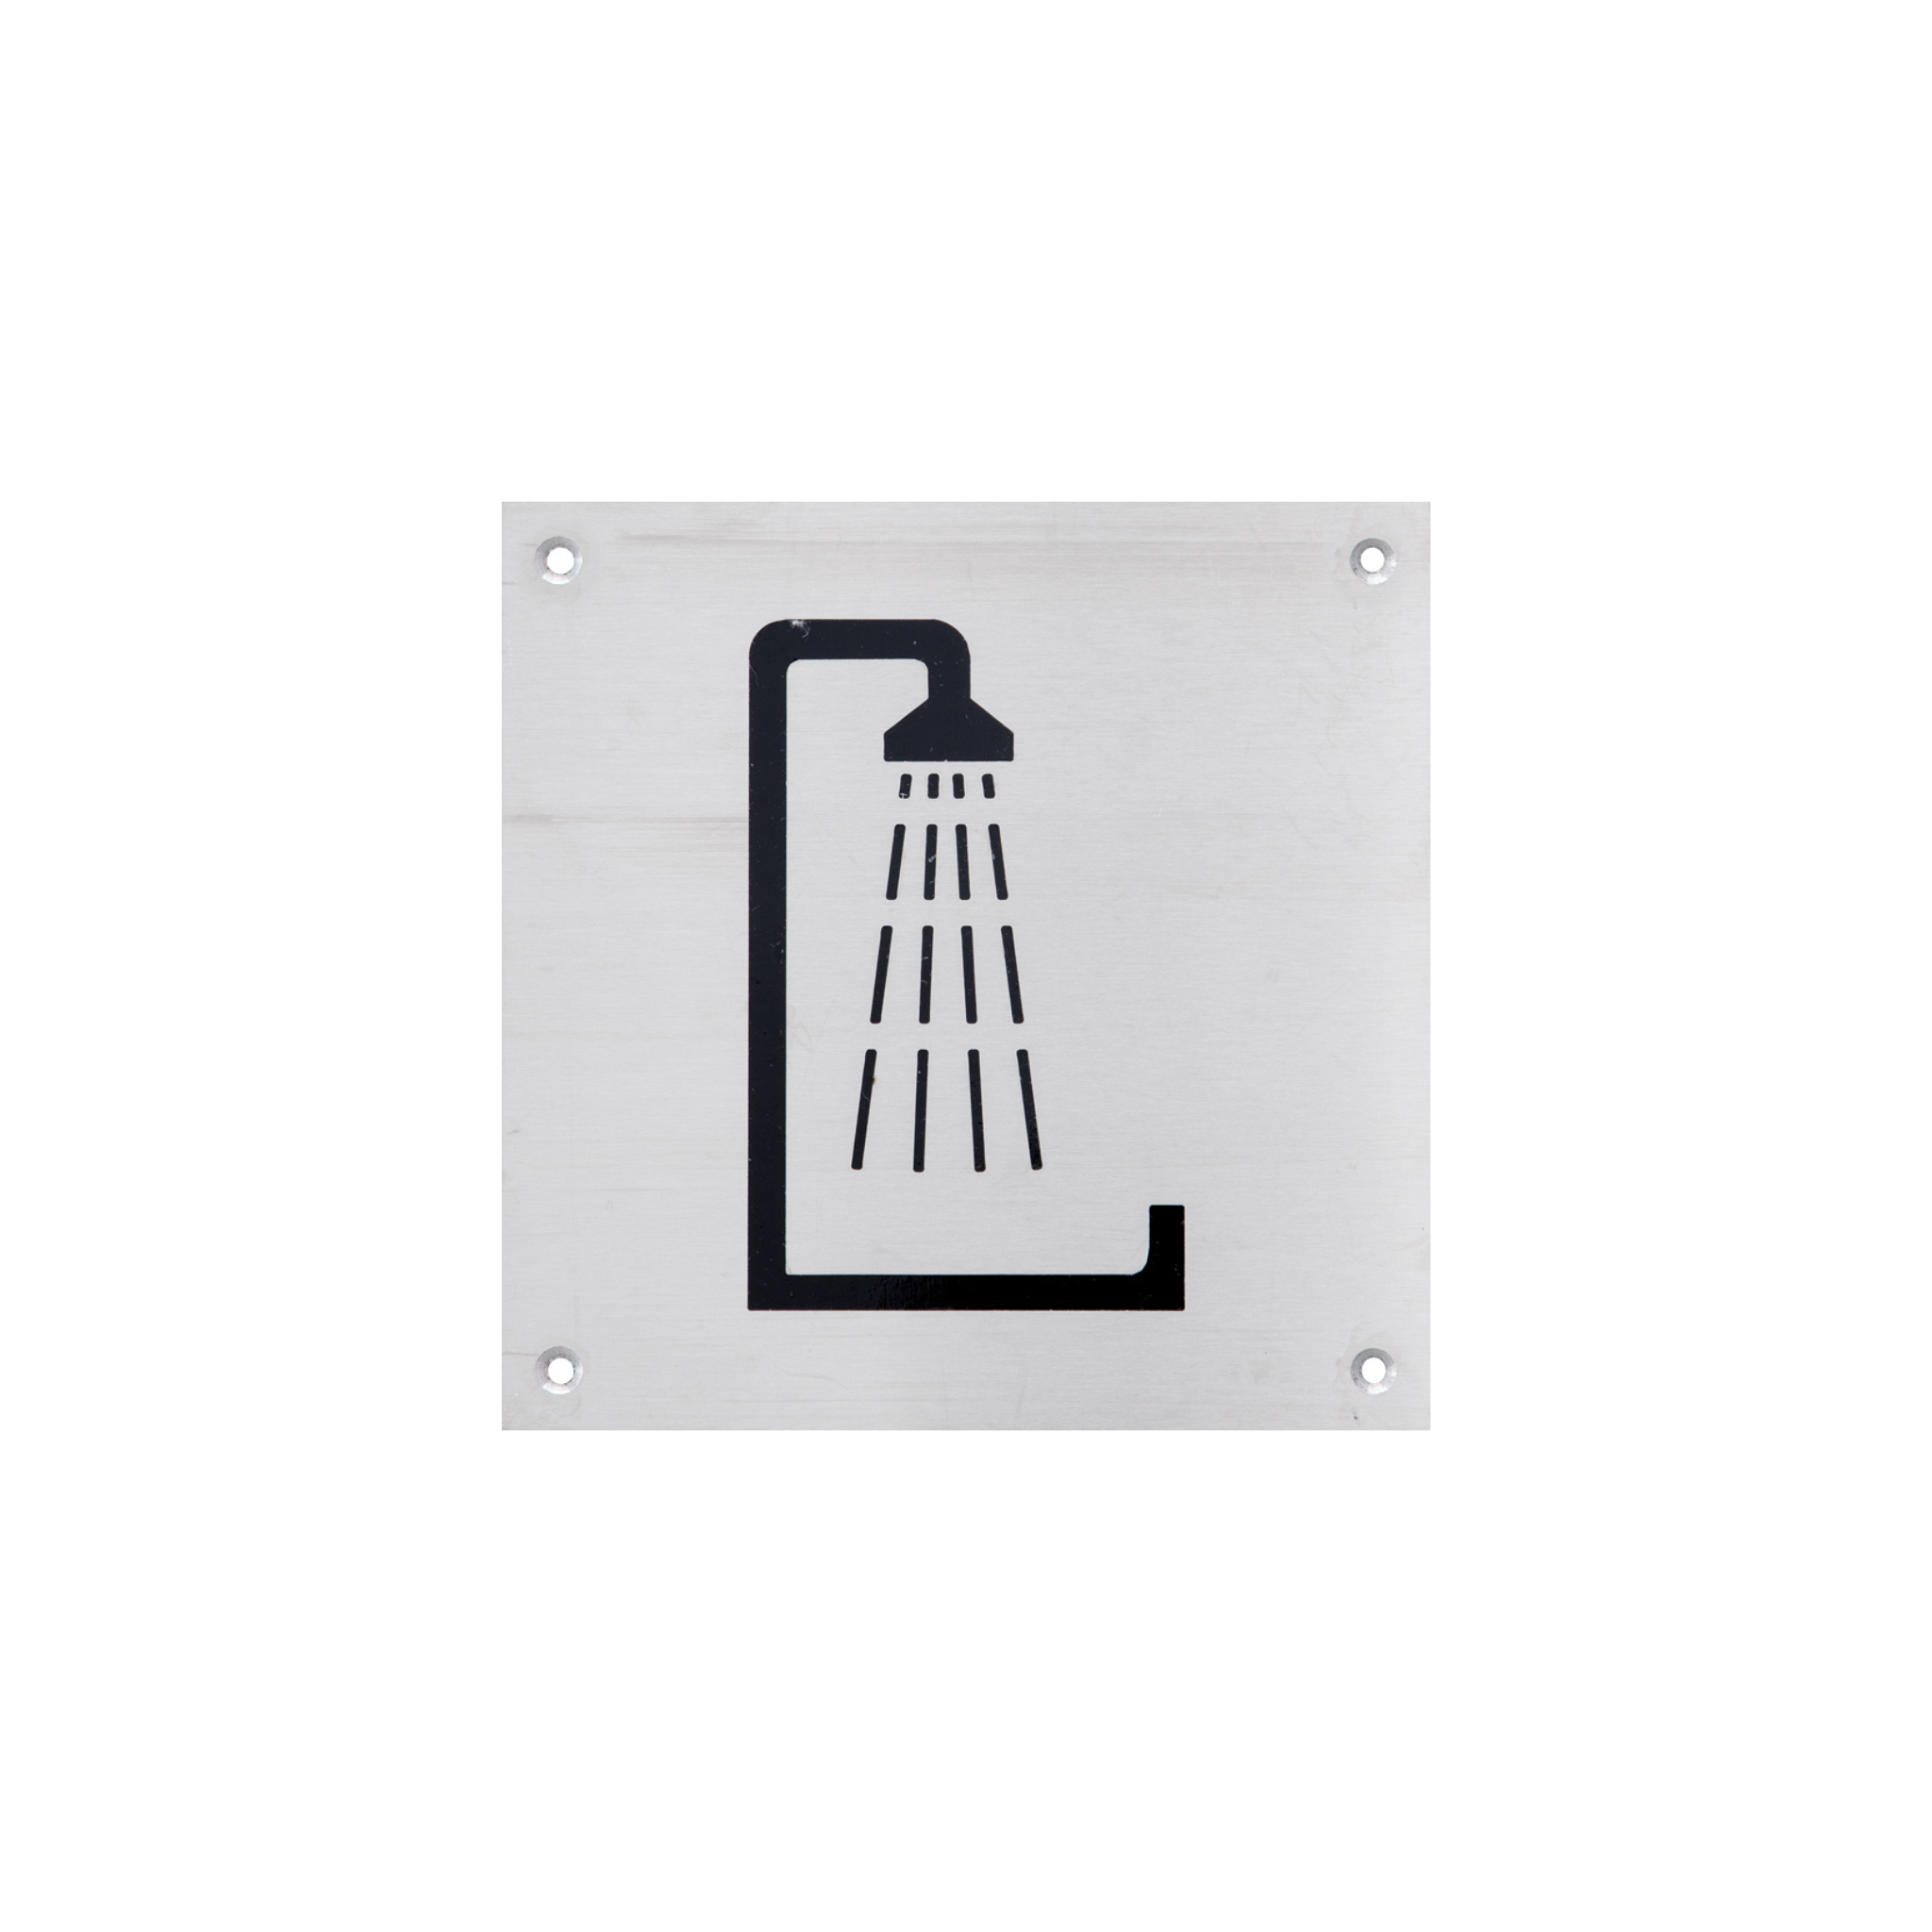 DSS-139, Door Signage, Shower , 150mm (l), 150mm (w), 1,2mm (t), Stainless Steel, DORMAKABA